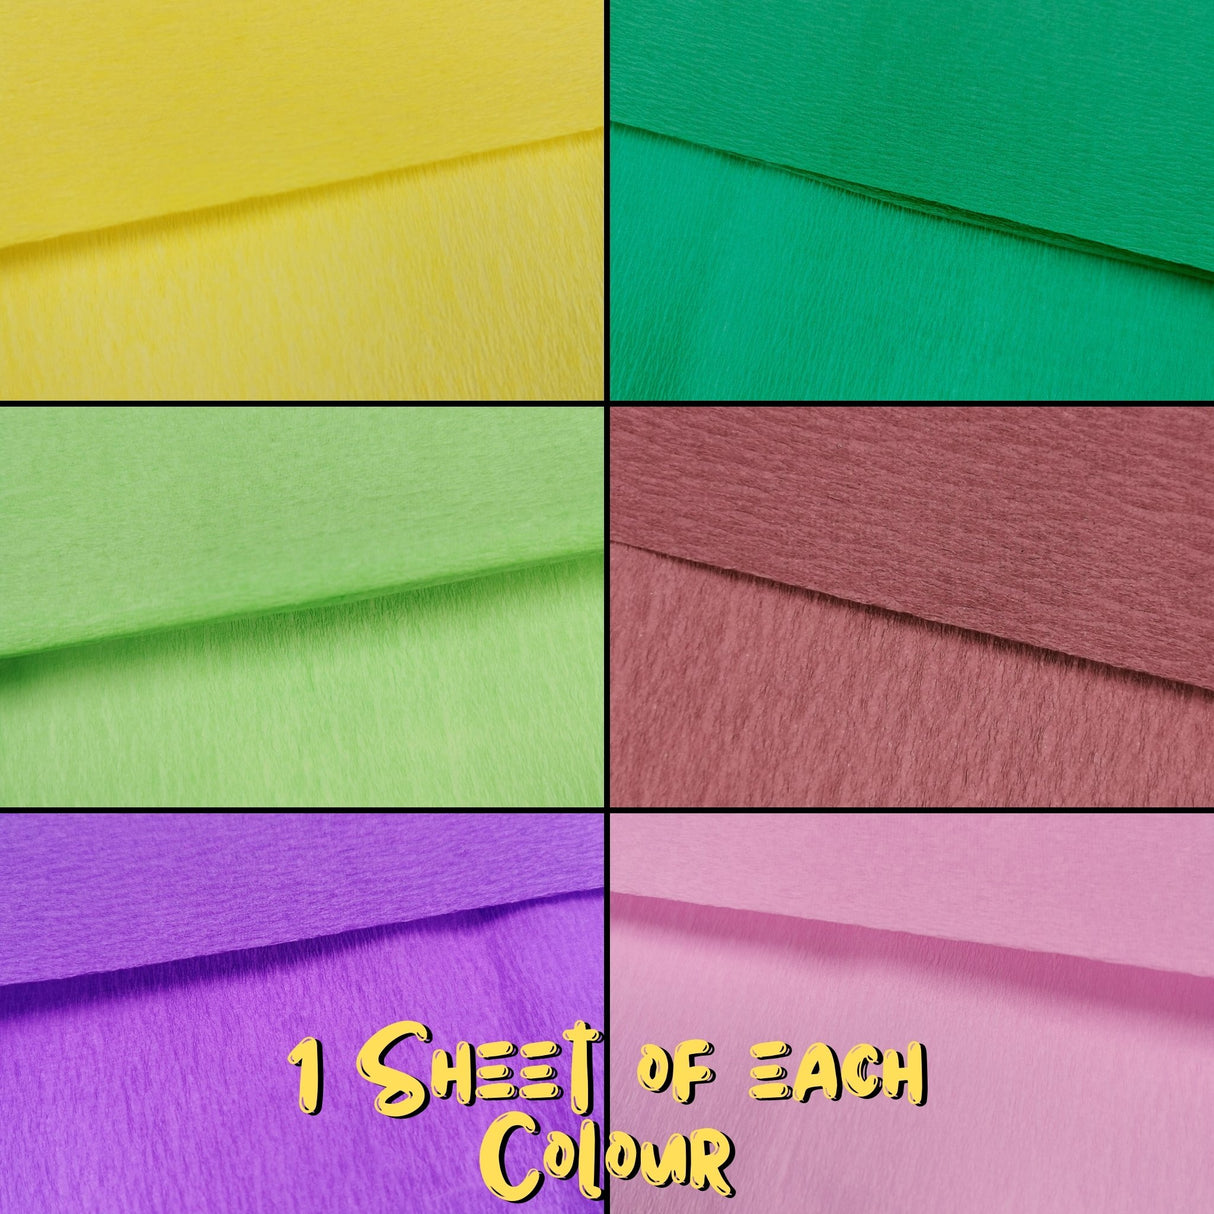 12 Extra Large Assorted Colour Crepe Paper Sheets For Flower Crafting & Gift Wrapping 50cm x 300cm